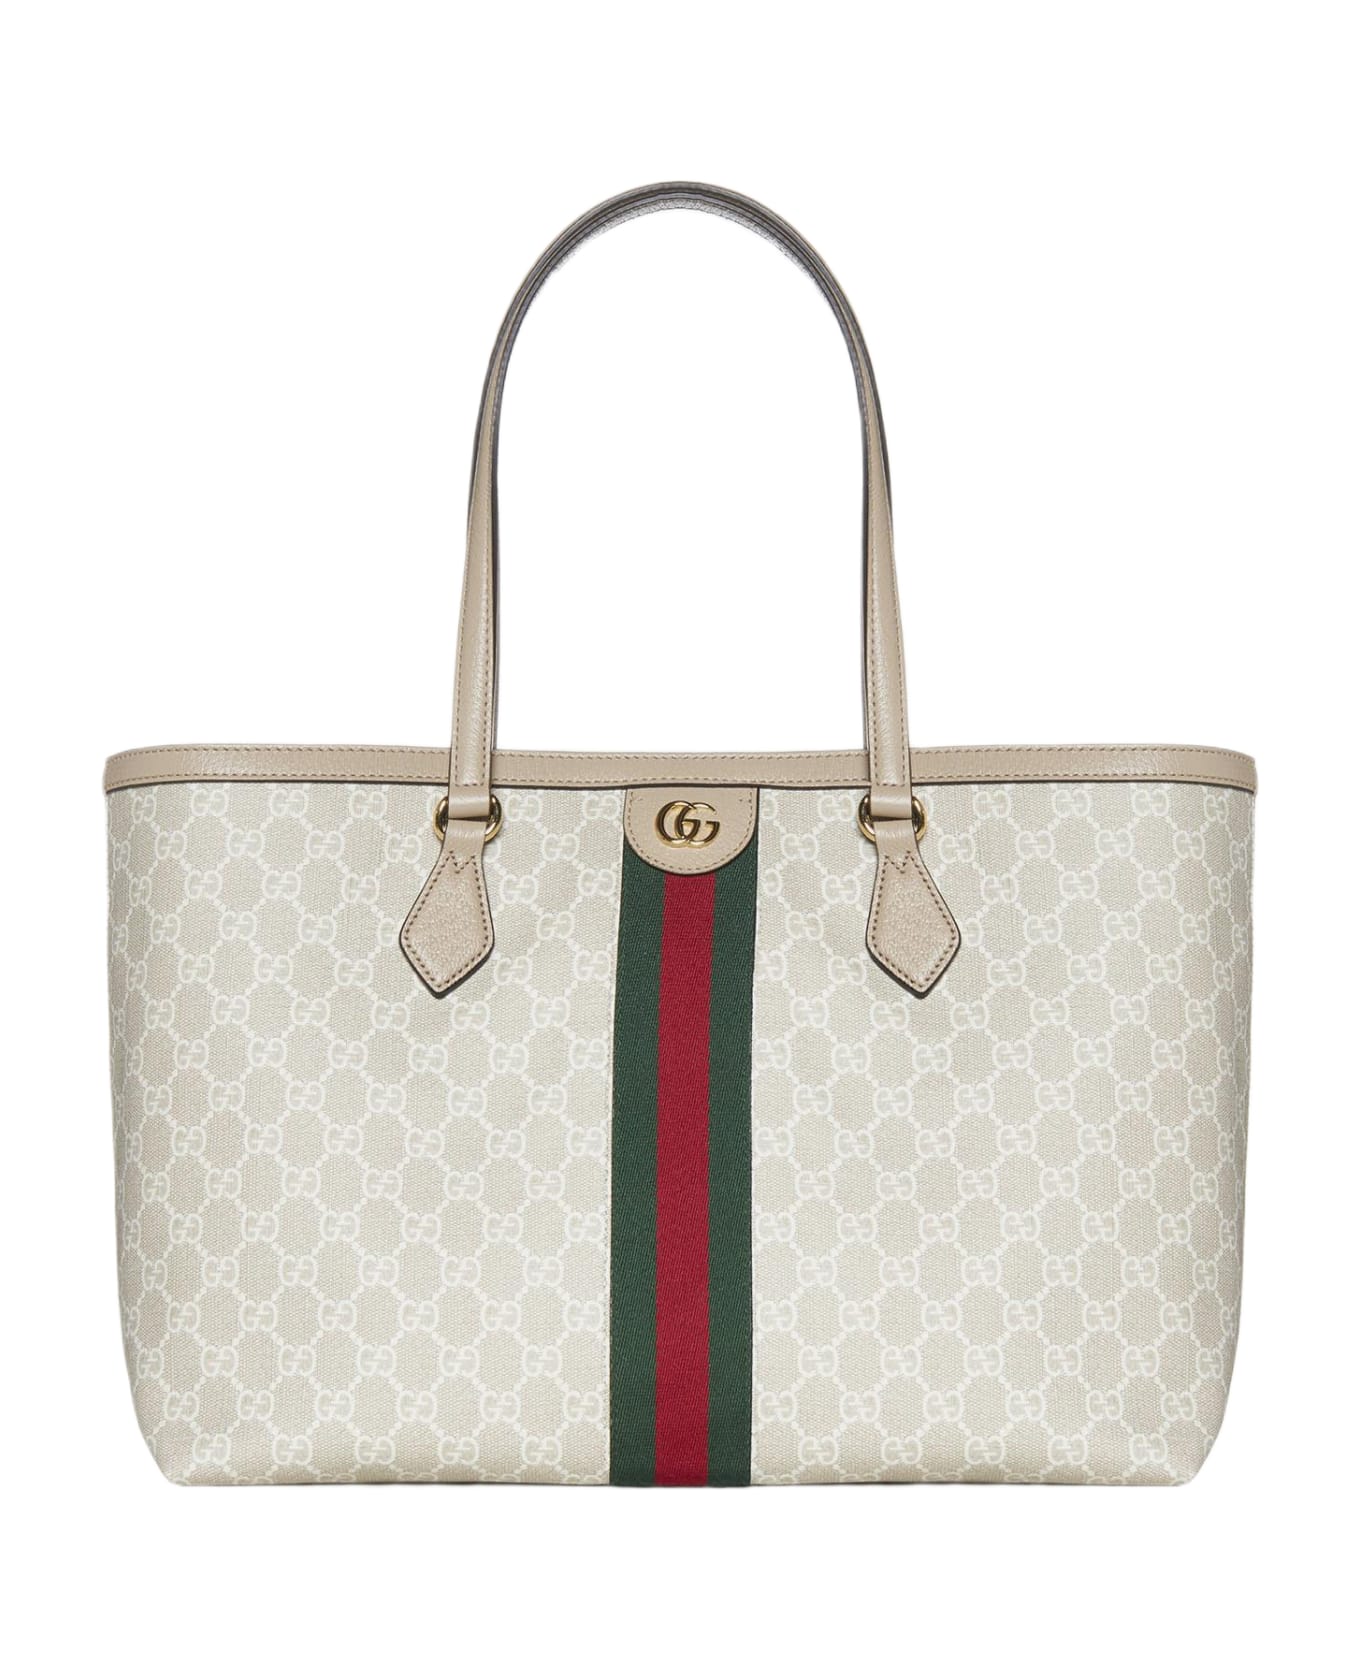 Gucci Ophidia Gg Canvas Medium Tote Bag - Beige/white トートバッグ